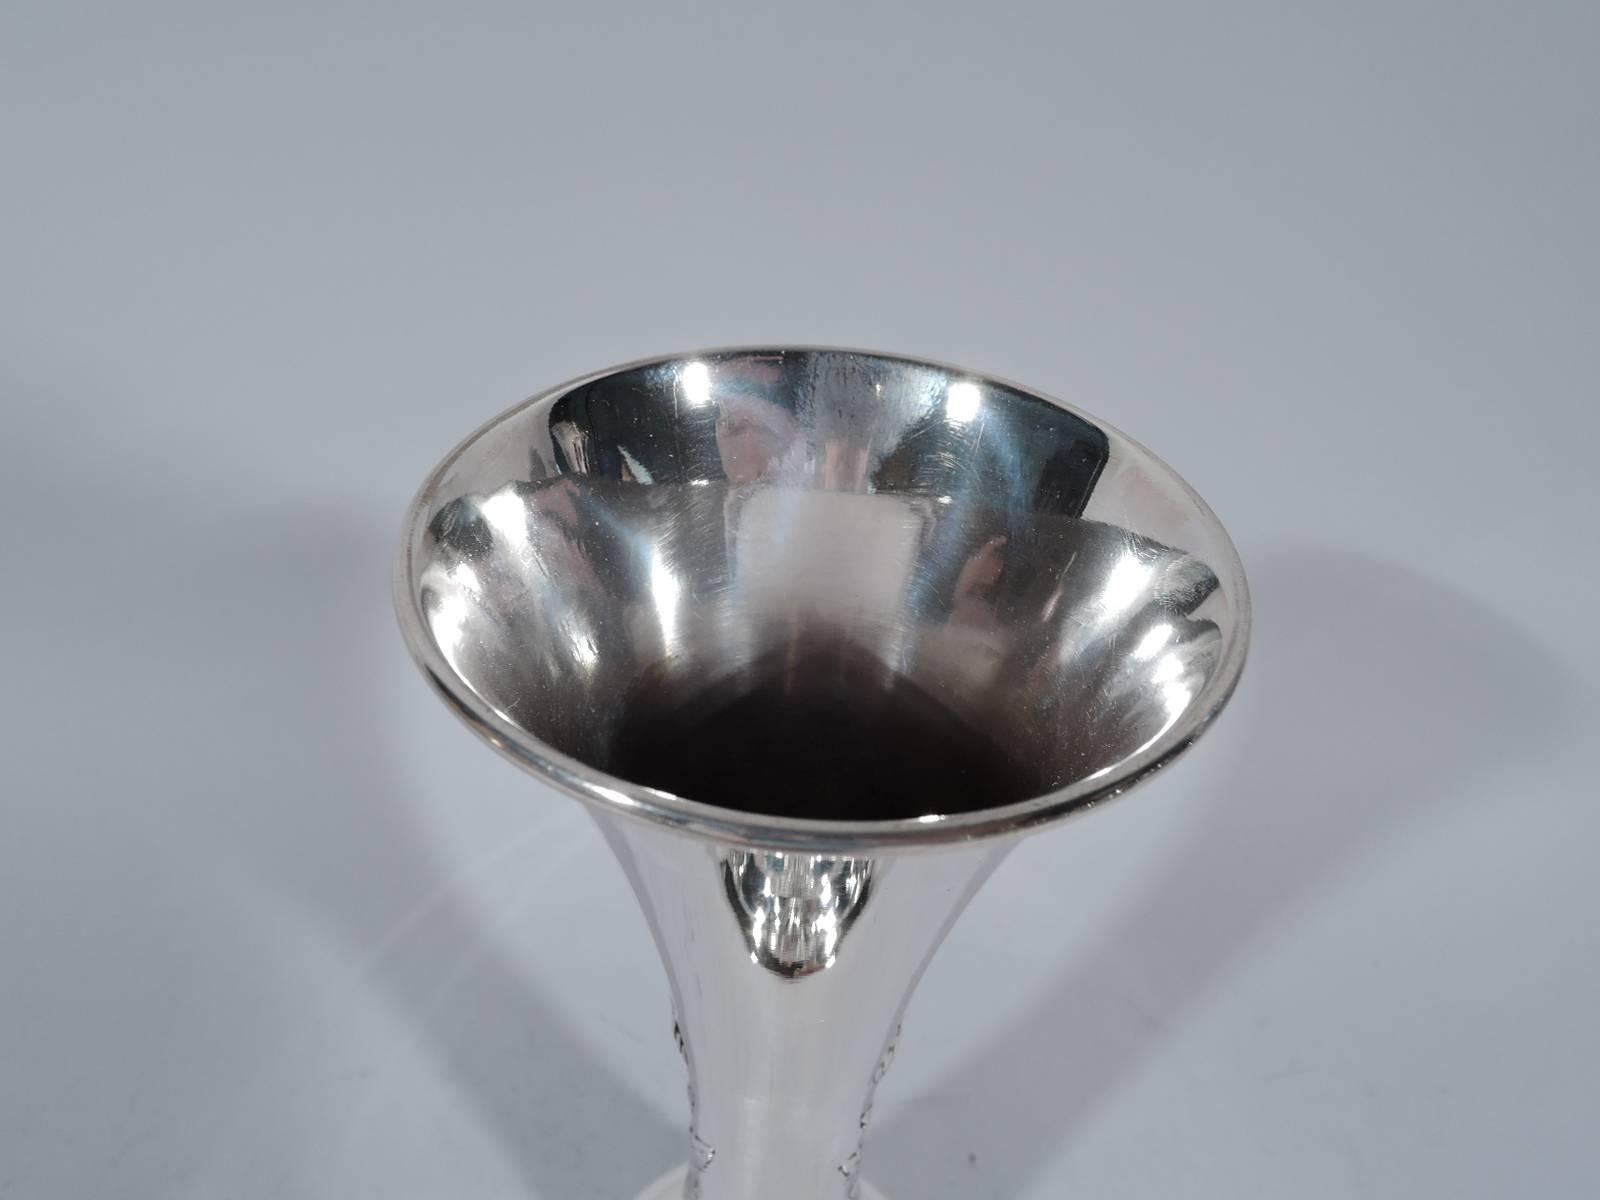 American Antique Whiting Edwardian Sterling Silver Vase